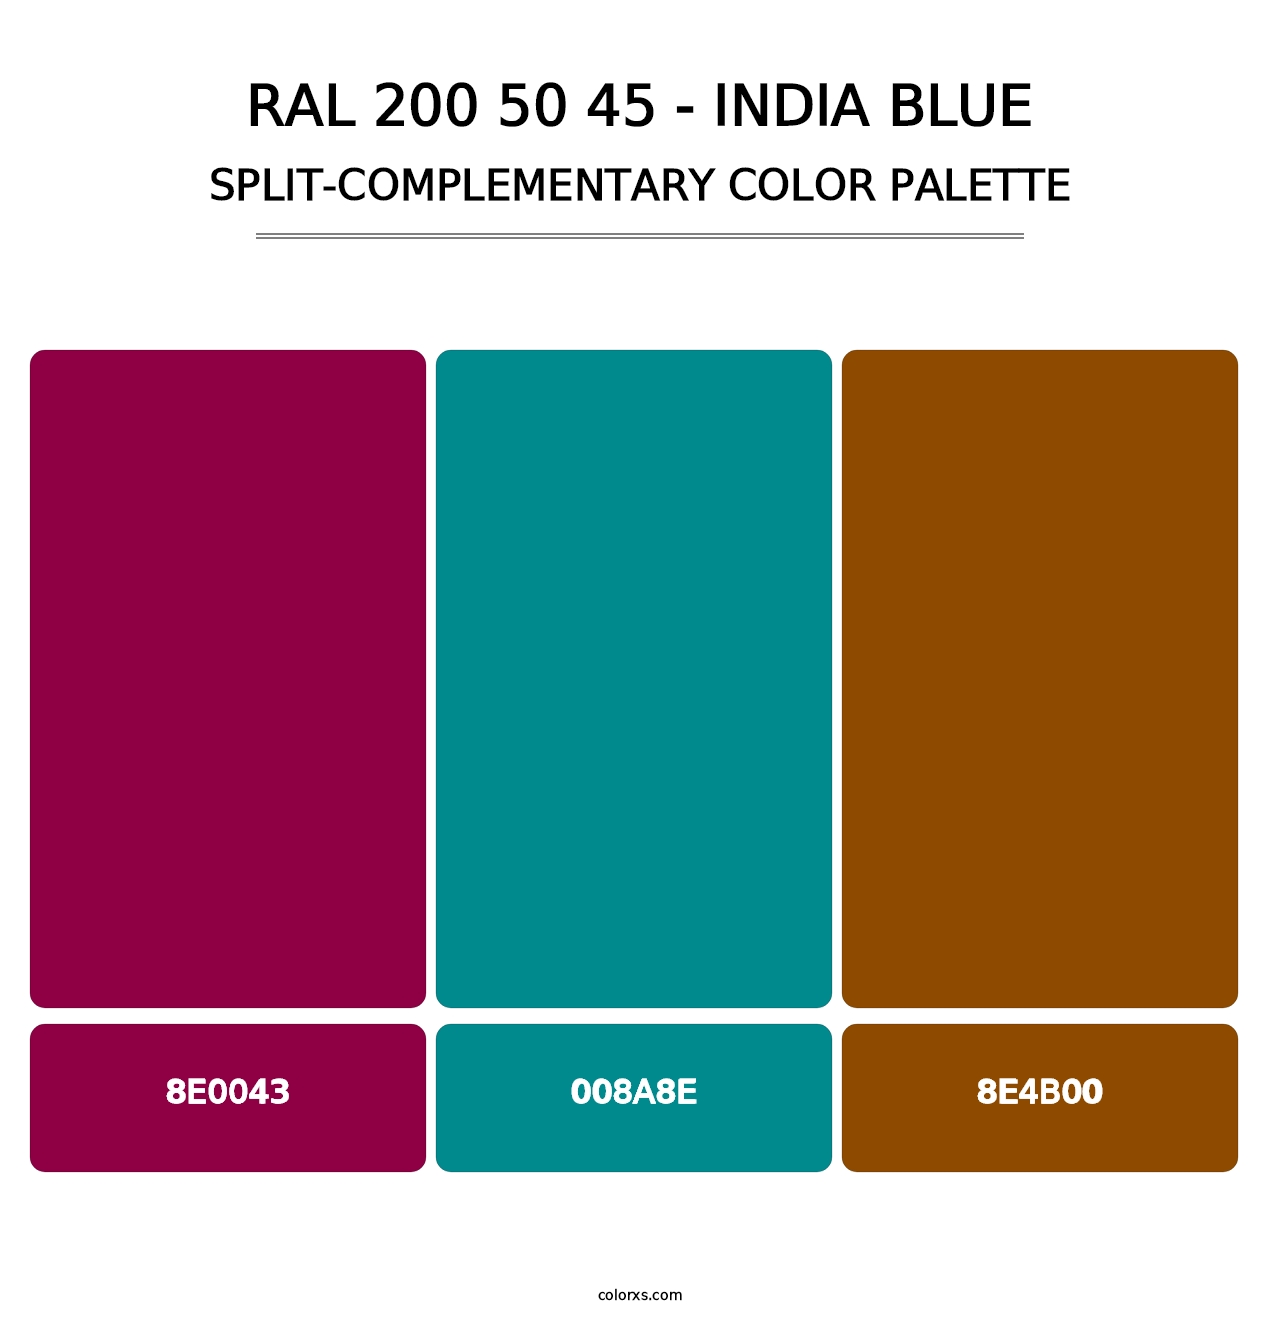 RAL 200 50 45 - India Blue - Split-Complementary Color Palette